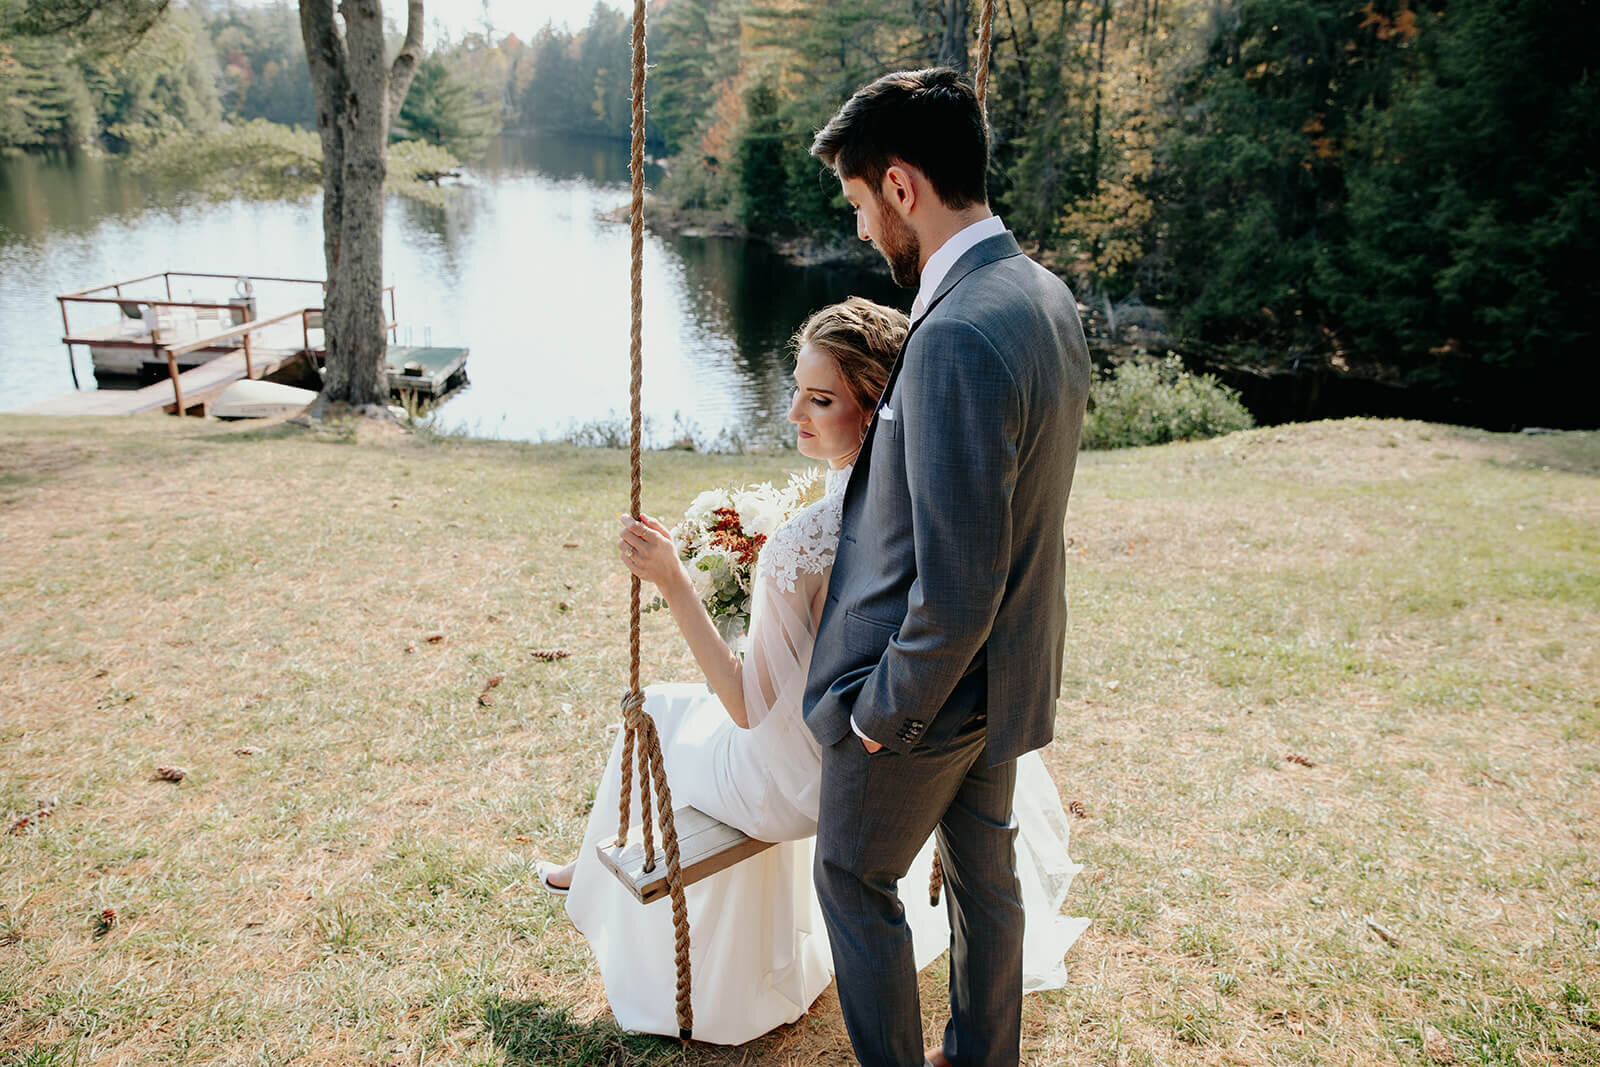  Bride and groom swing during their small wedding at a gorgeous lake in the Adirondacks in Upstate NY. 